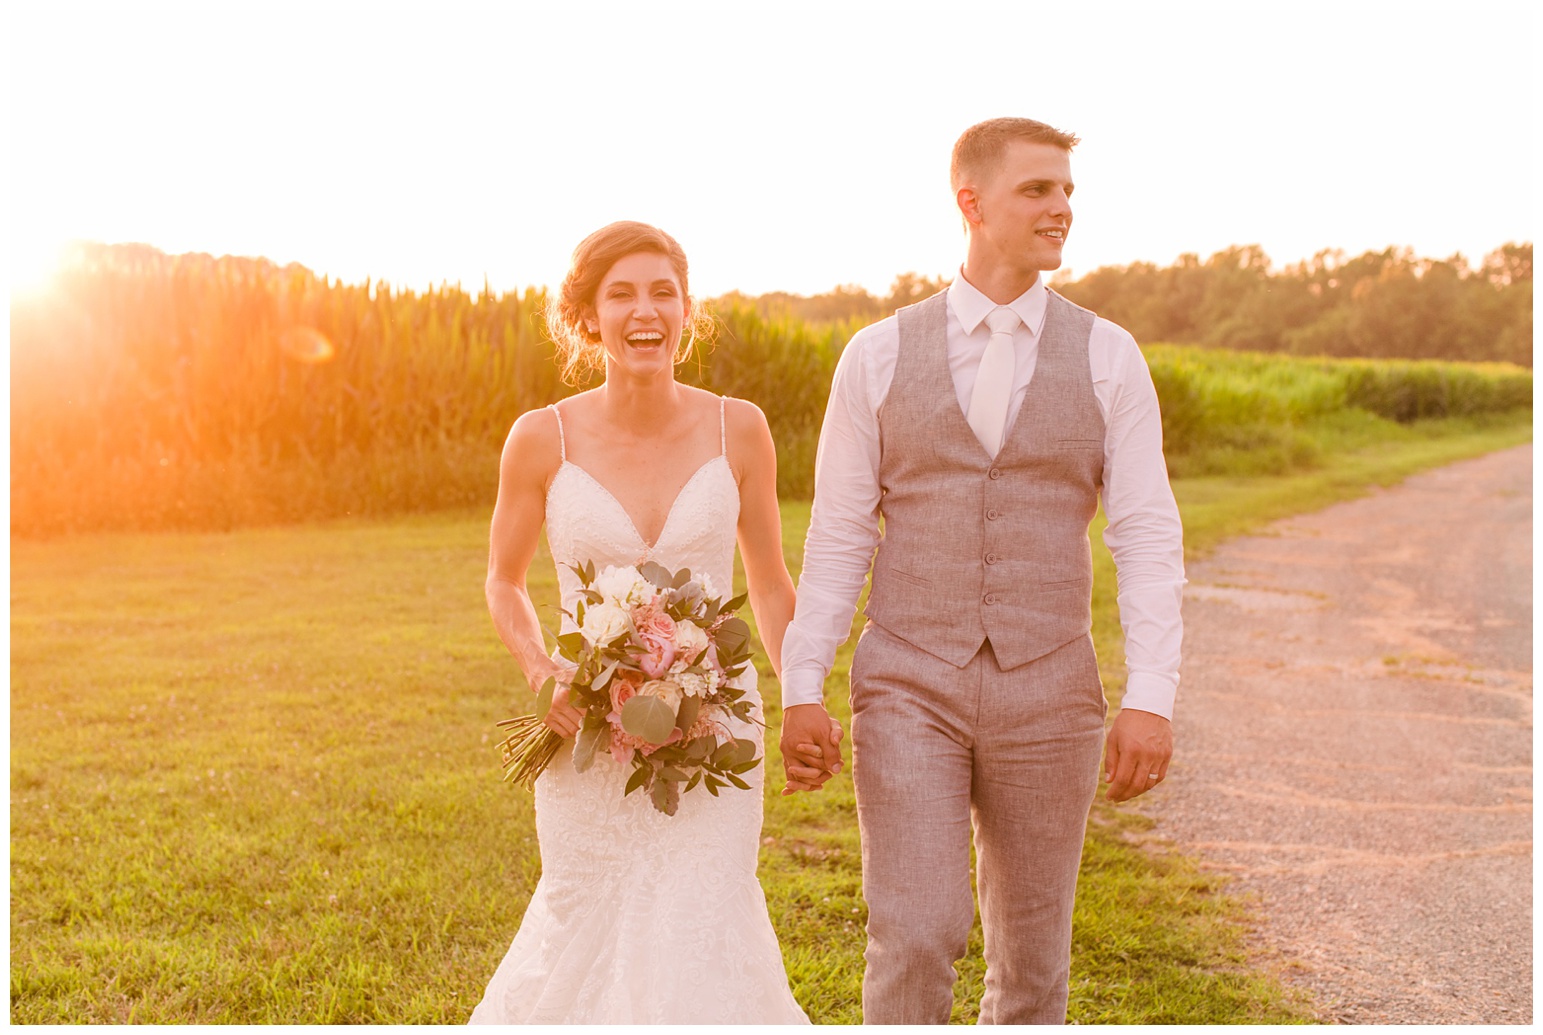 worsell manor wedding in the summer - warwick md - now featured on My Eastern Shore Wedding - coastal - sea - nautical - eastern shore - inspired wedding ideas and inspo - photo of bride and groom outdoors at sunset - golden hour - in front of corn field